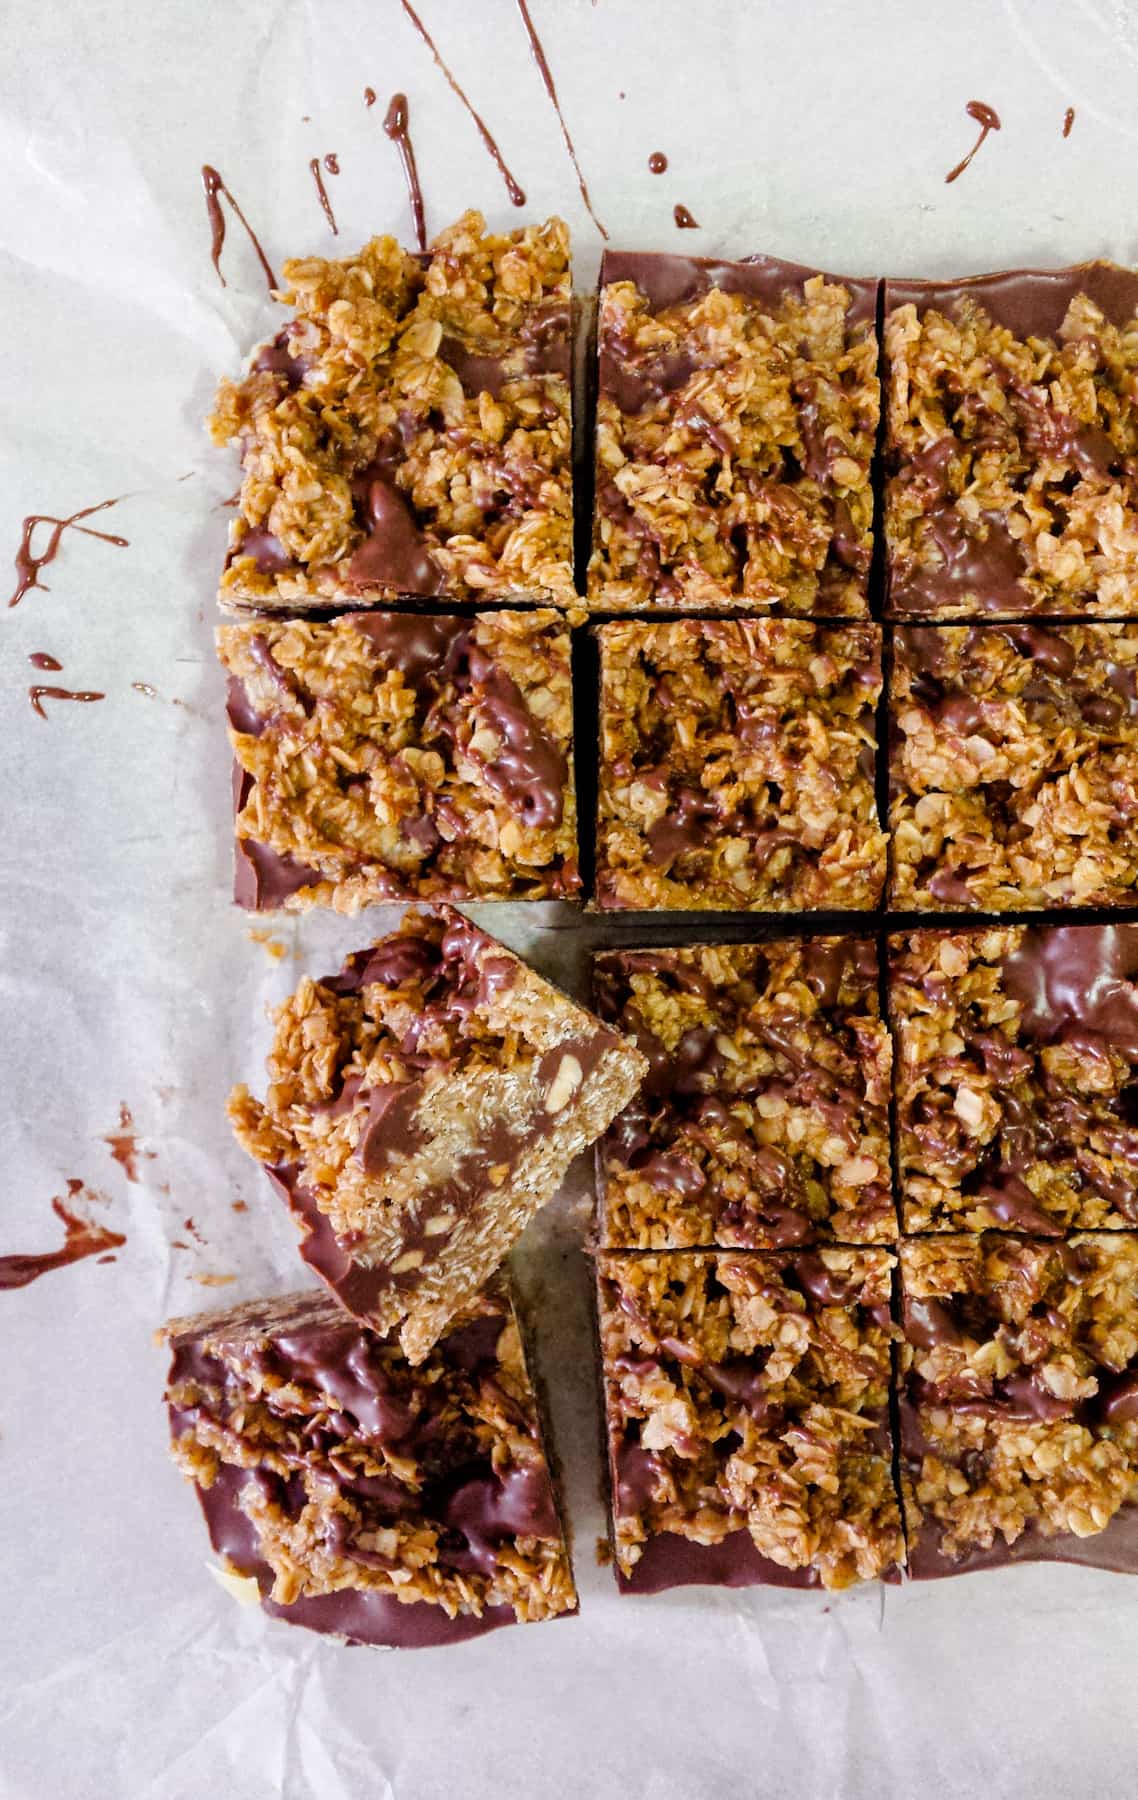 Overhead image of a tray  of sliced chocolate peanut butter oat bars.